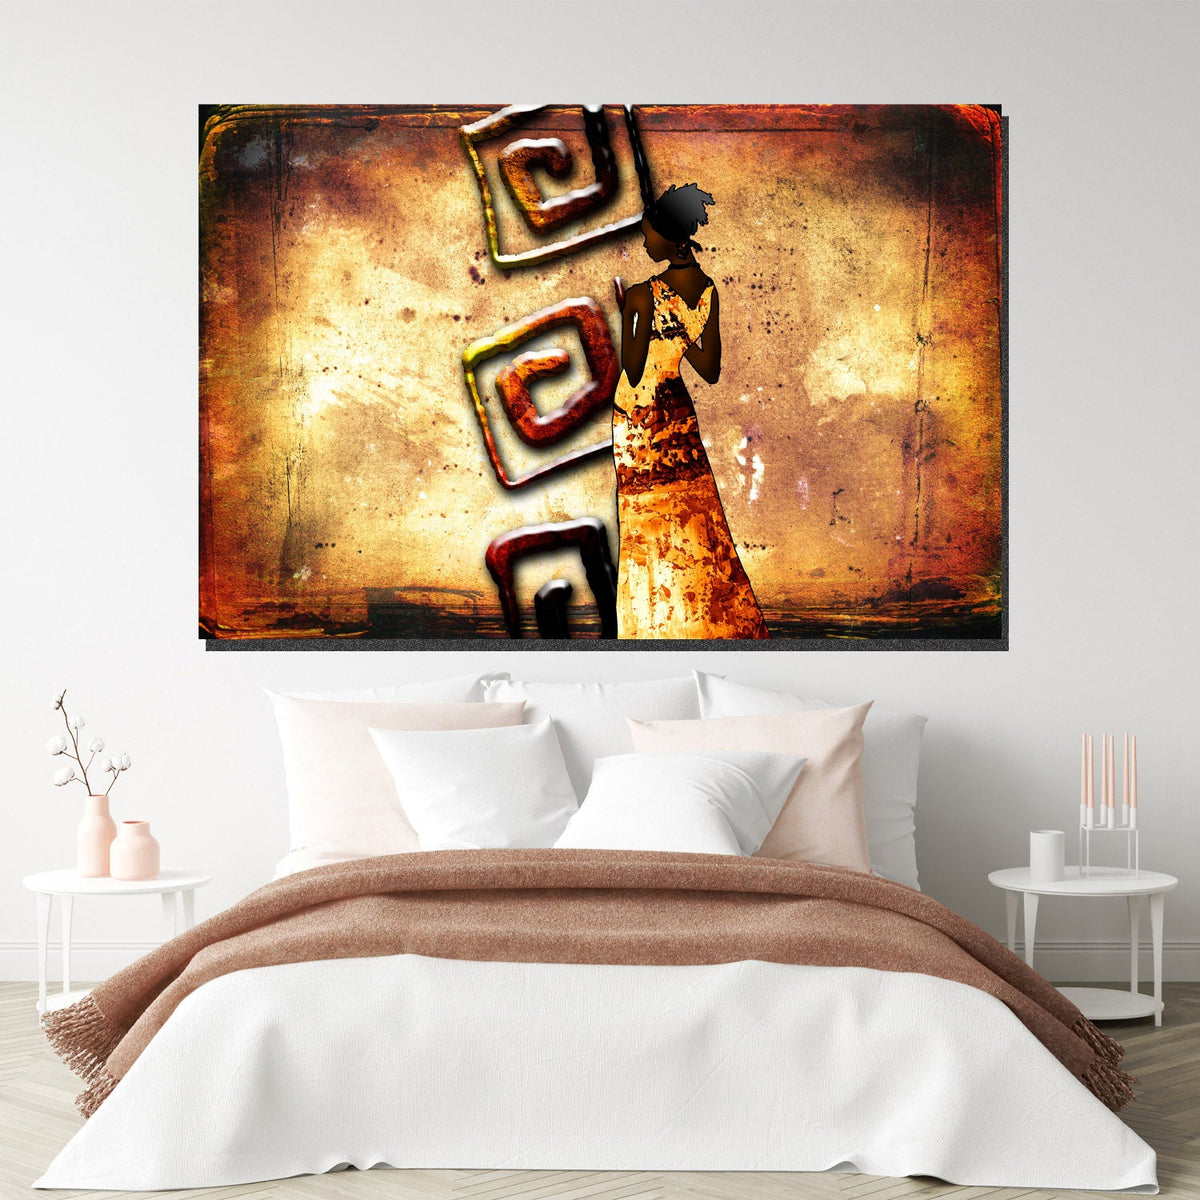 https://cdn.shopify.com/s/files/1/0387/9986/8044/products/SolitudeCanvasArtPrintStretched-1.jpg